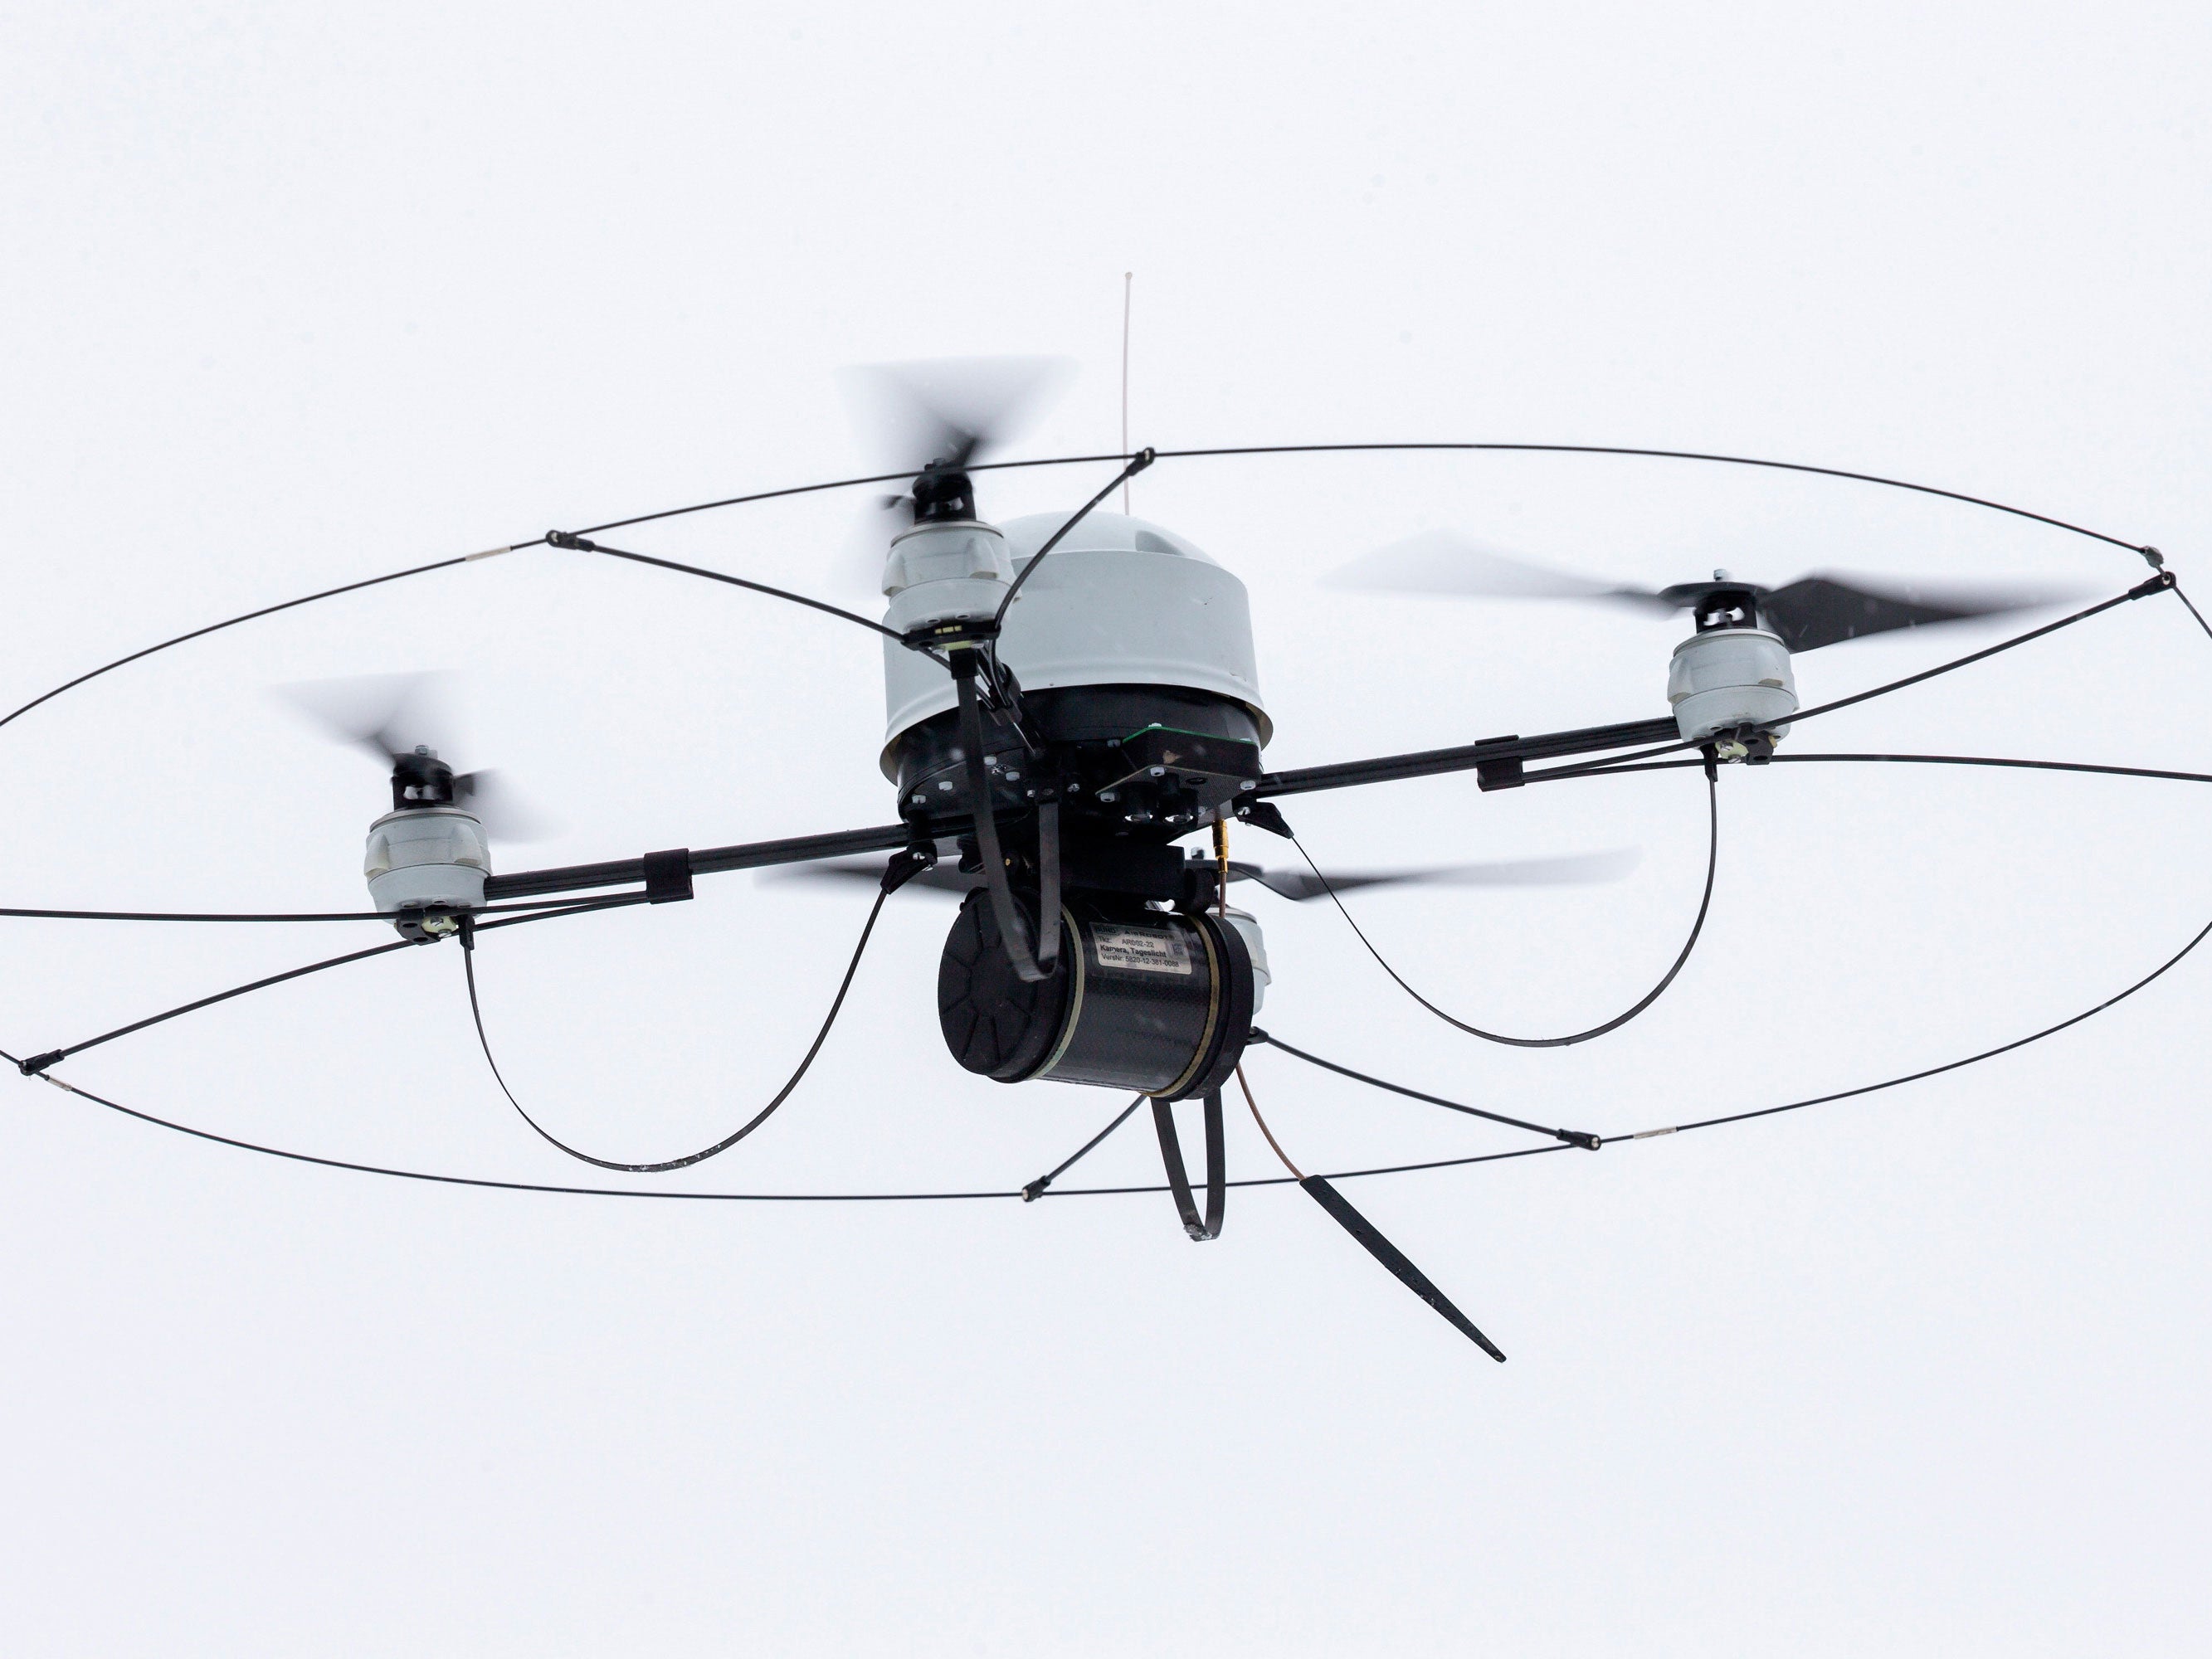 The letter warns that quadcopters such as this could be used to autonomously attack targets